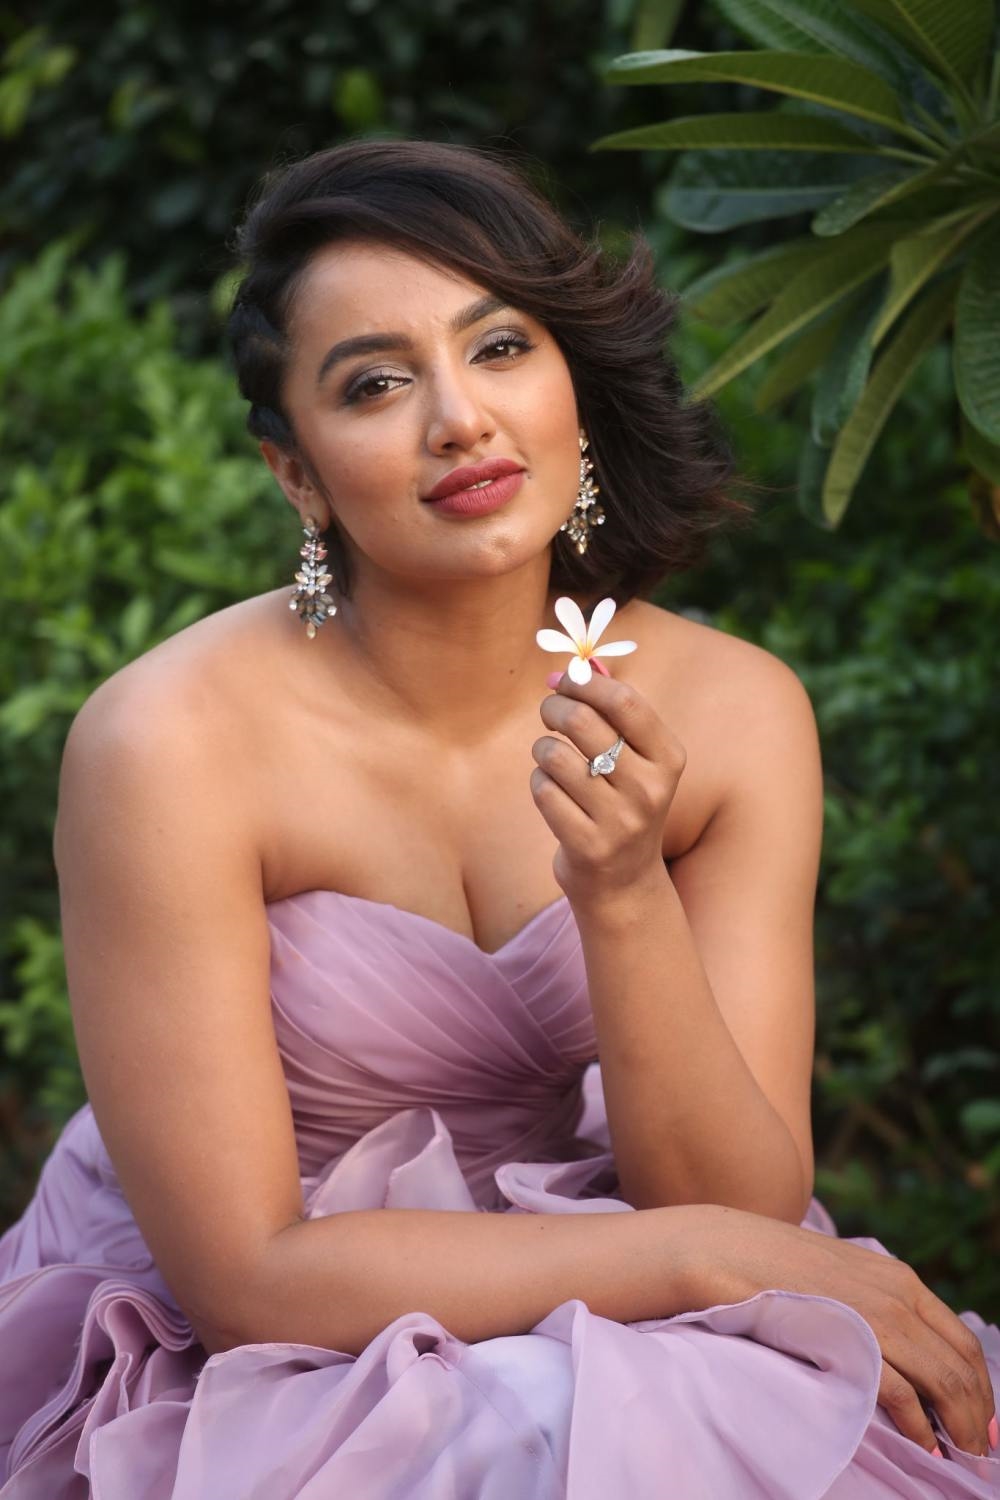 BiggBoss2 Contestant Tejaswi Madivada Hot Sizzling Images In Pink Dress